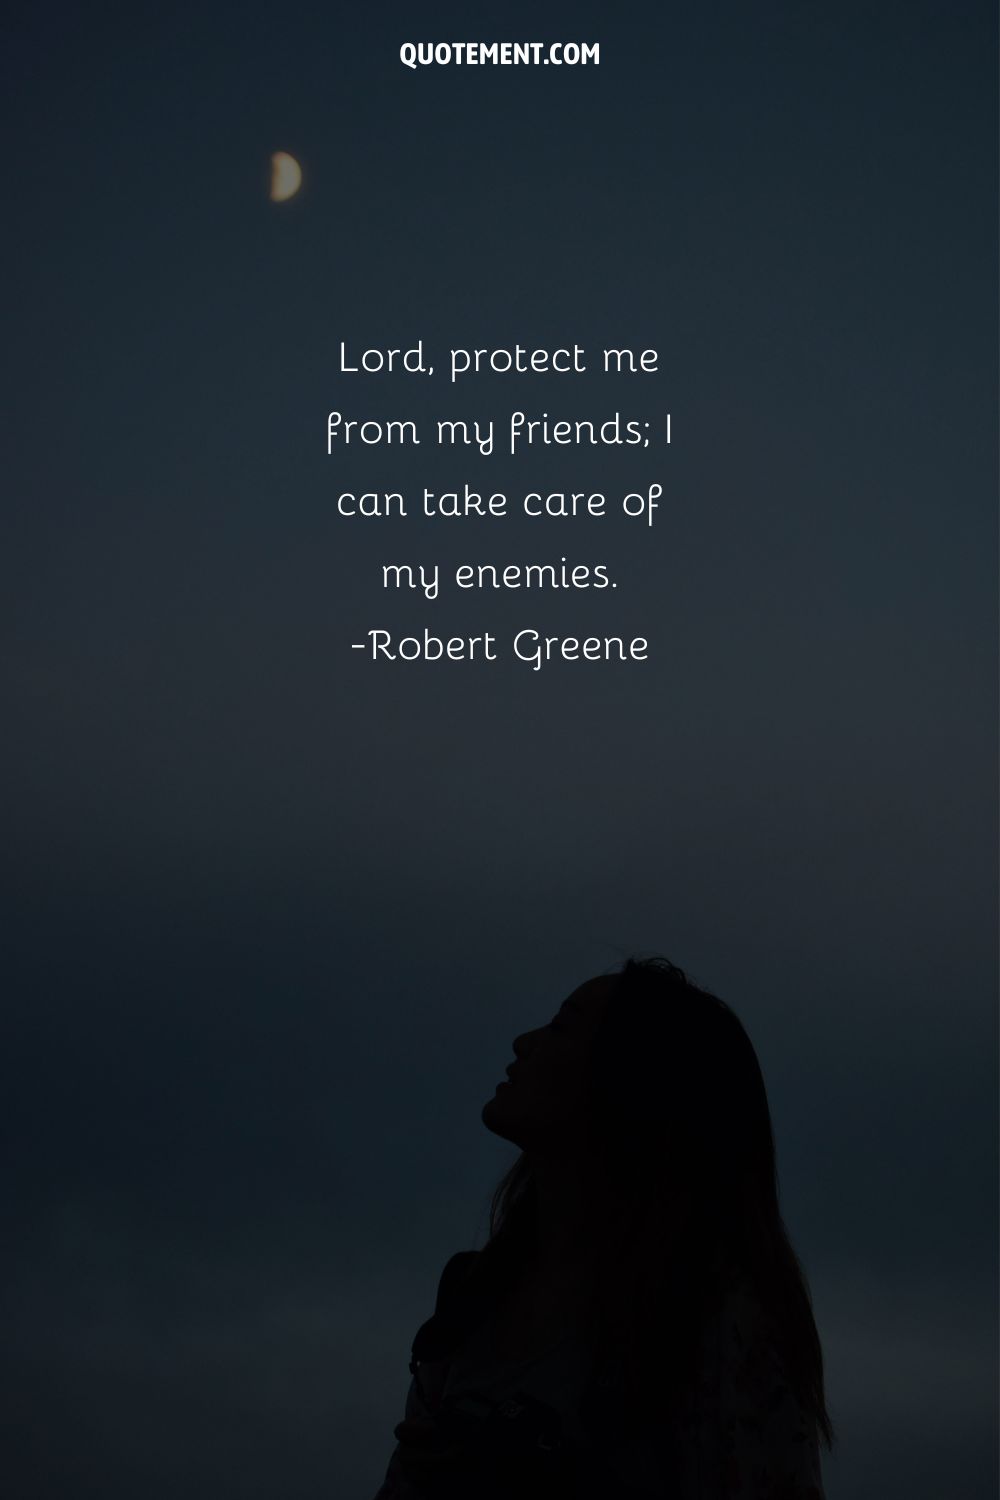 Lord, protect me from my friends; I can take care of my enemies